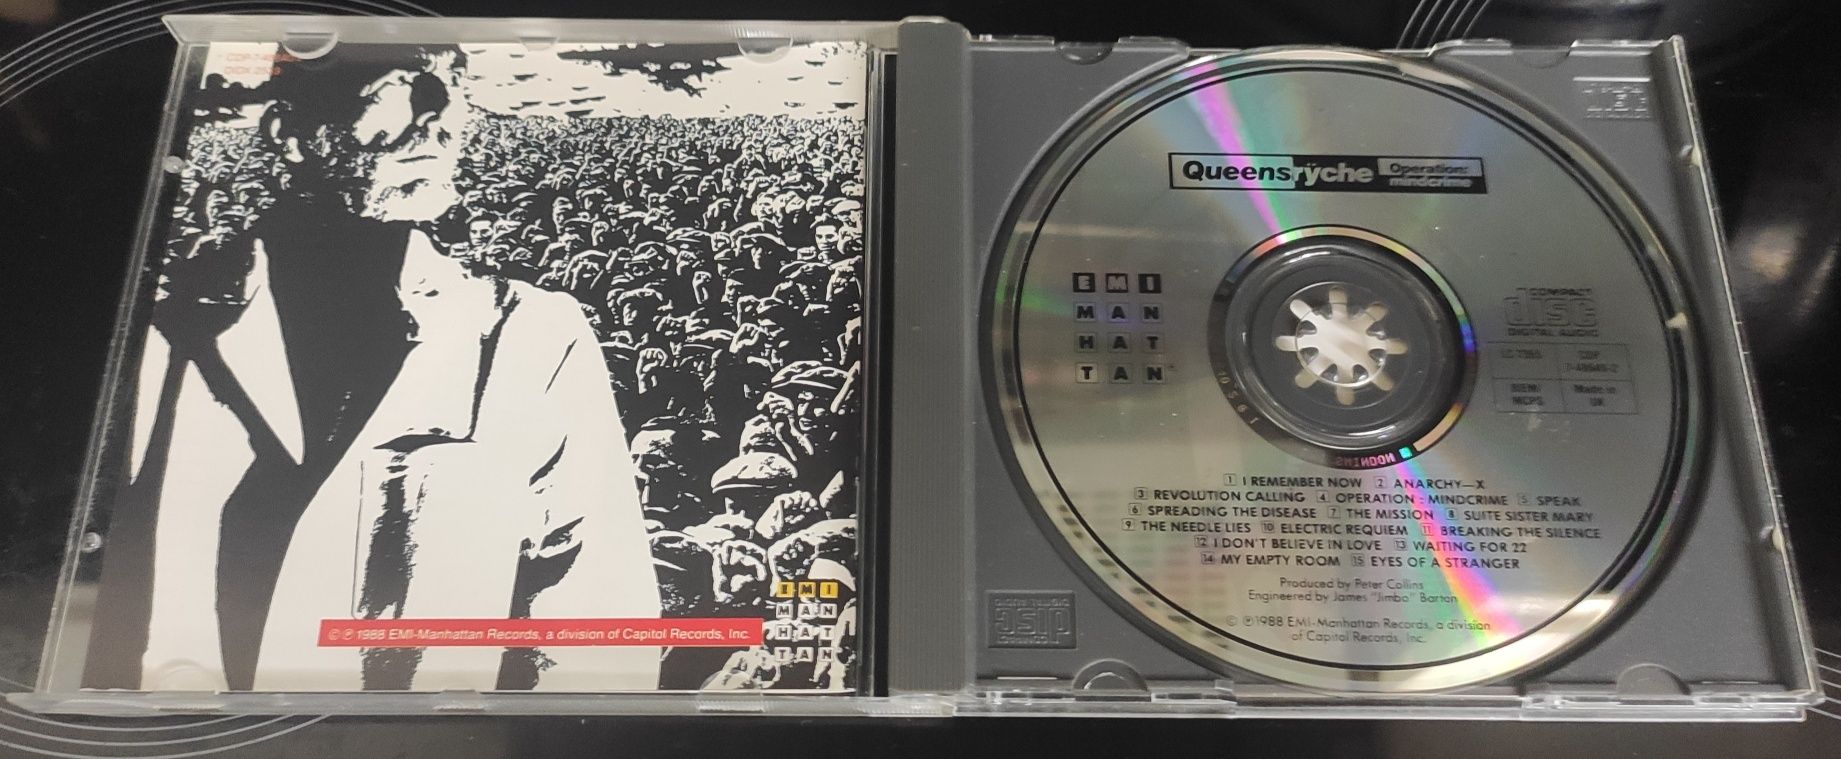 Queensryche "Operation: Mindcrime" cd